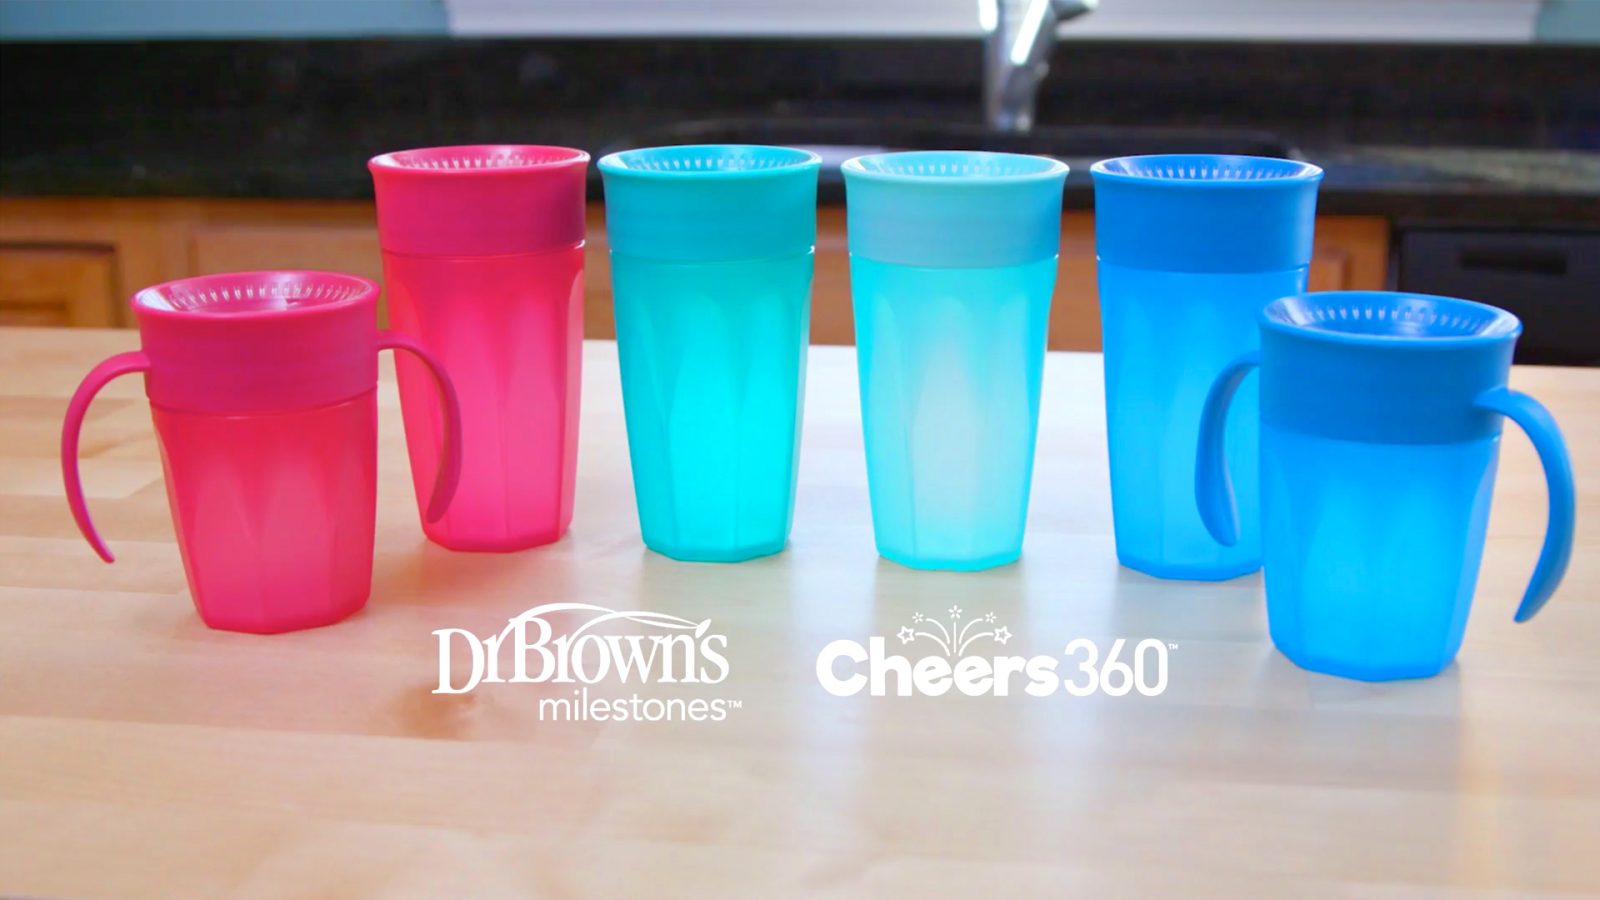 Dr. Brown's Dr. Brown’s™ Cheers 360 Spoutless Transition Sippy Cup, 10oz (9m+), 2 Count